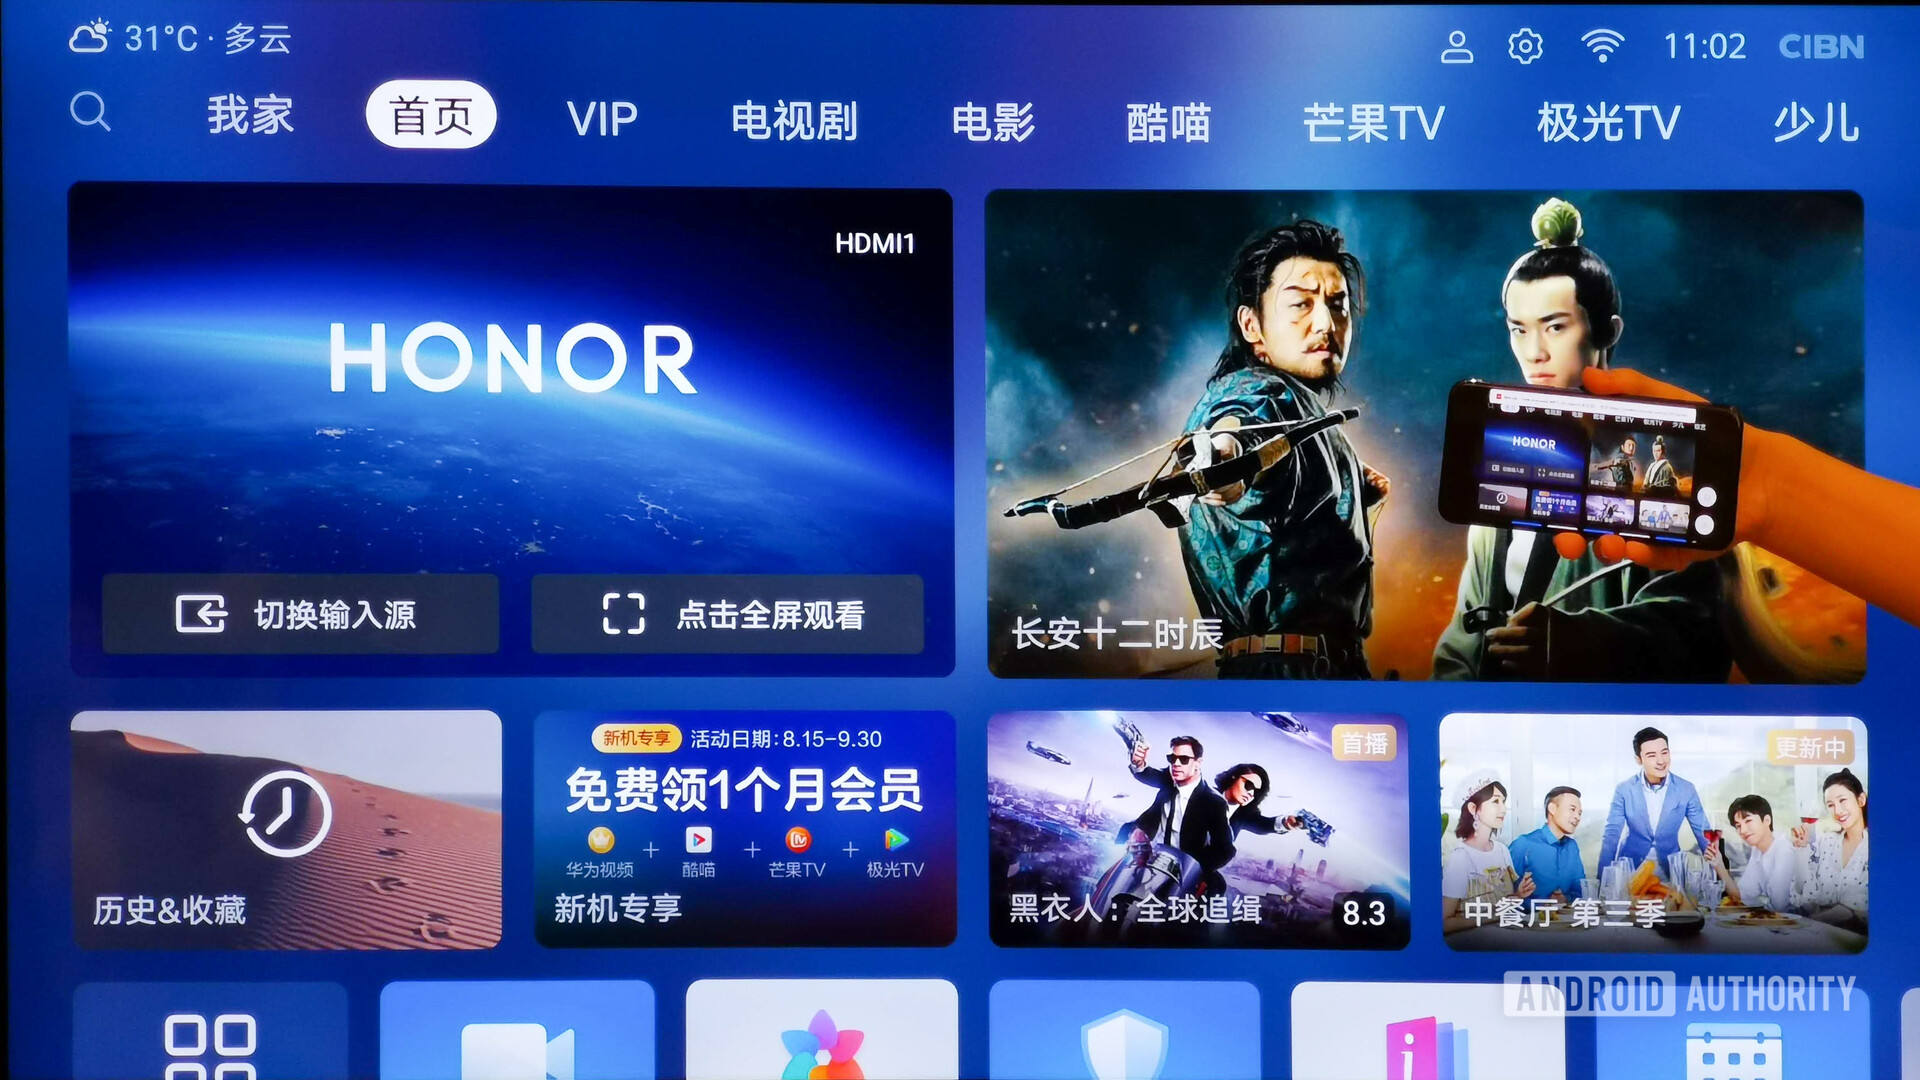 It looks like the Honor Vision might not be the only Huawei TV or smart screen.